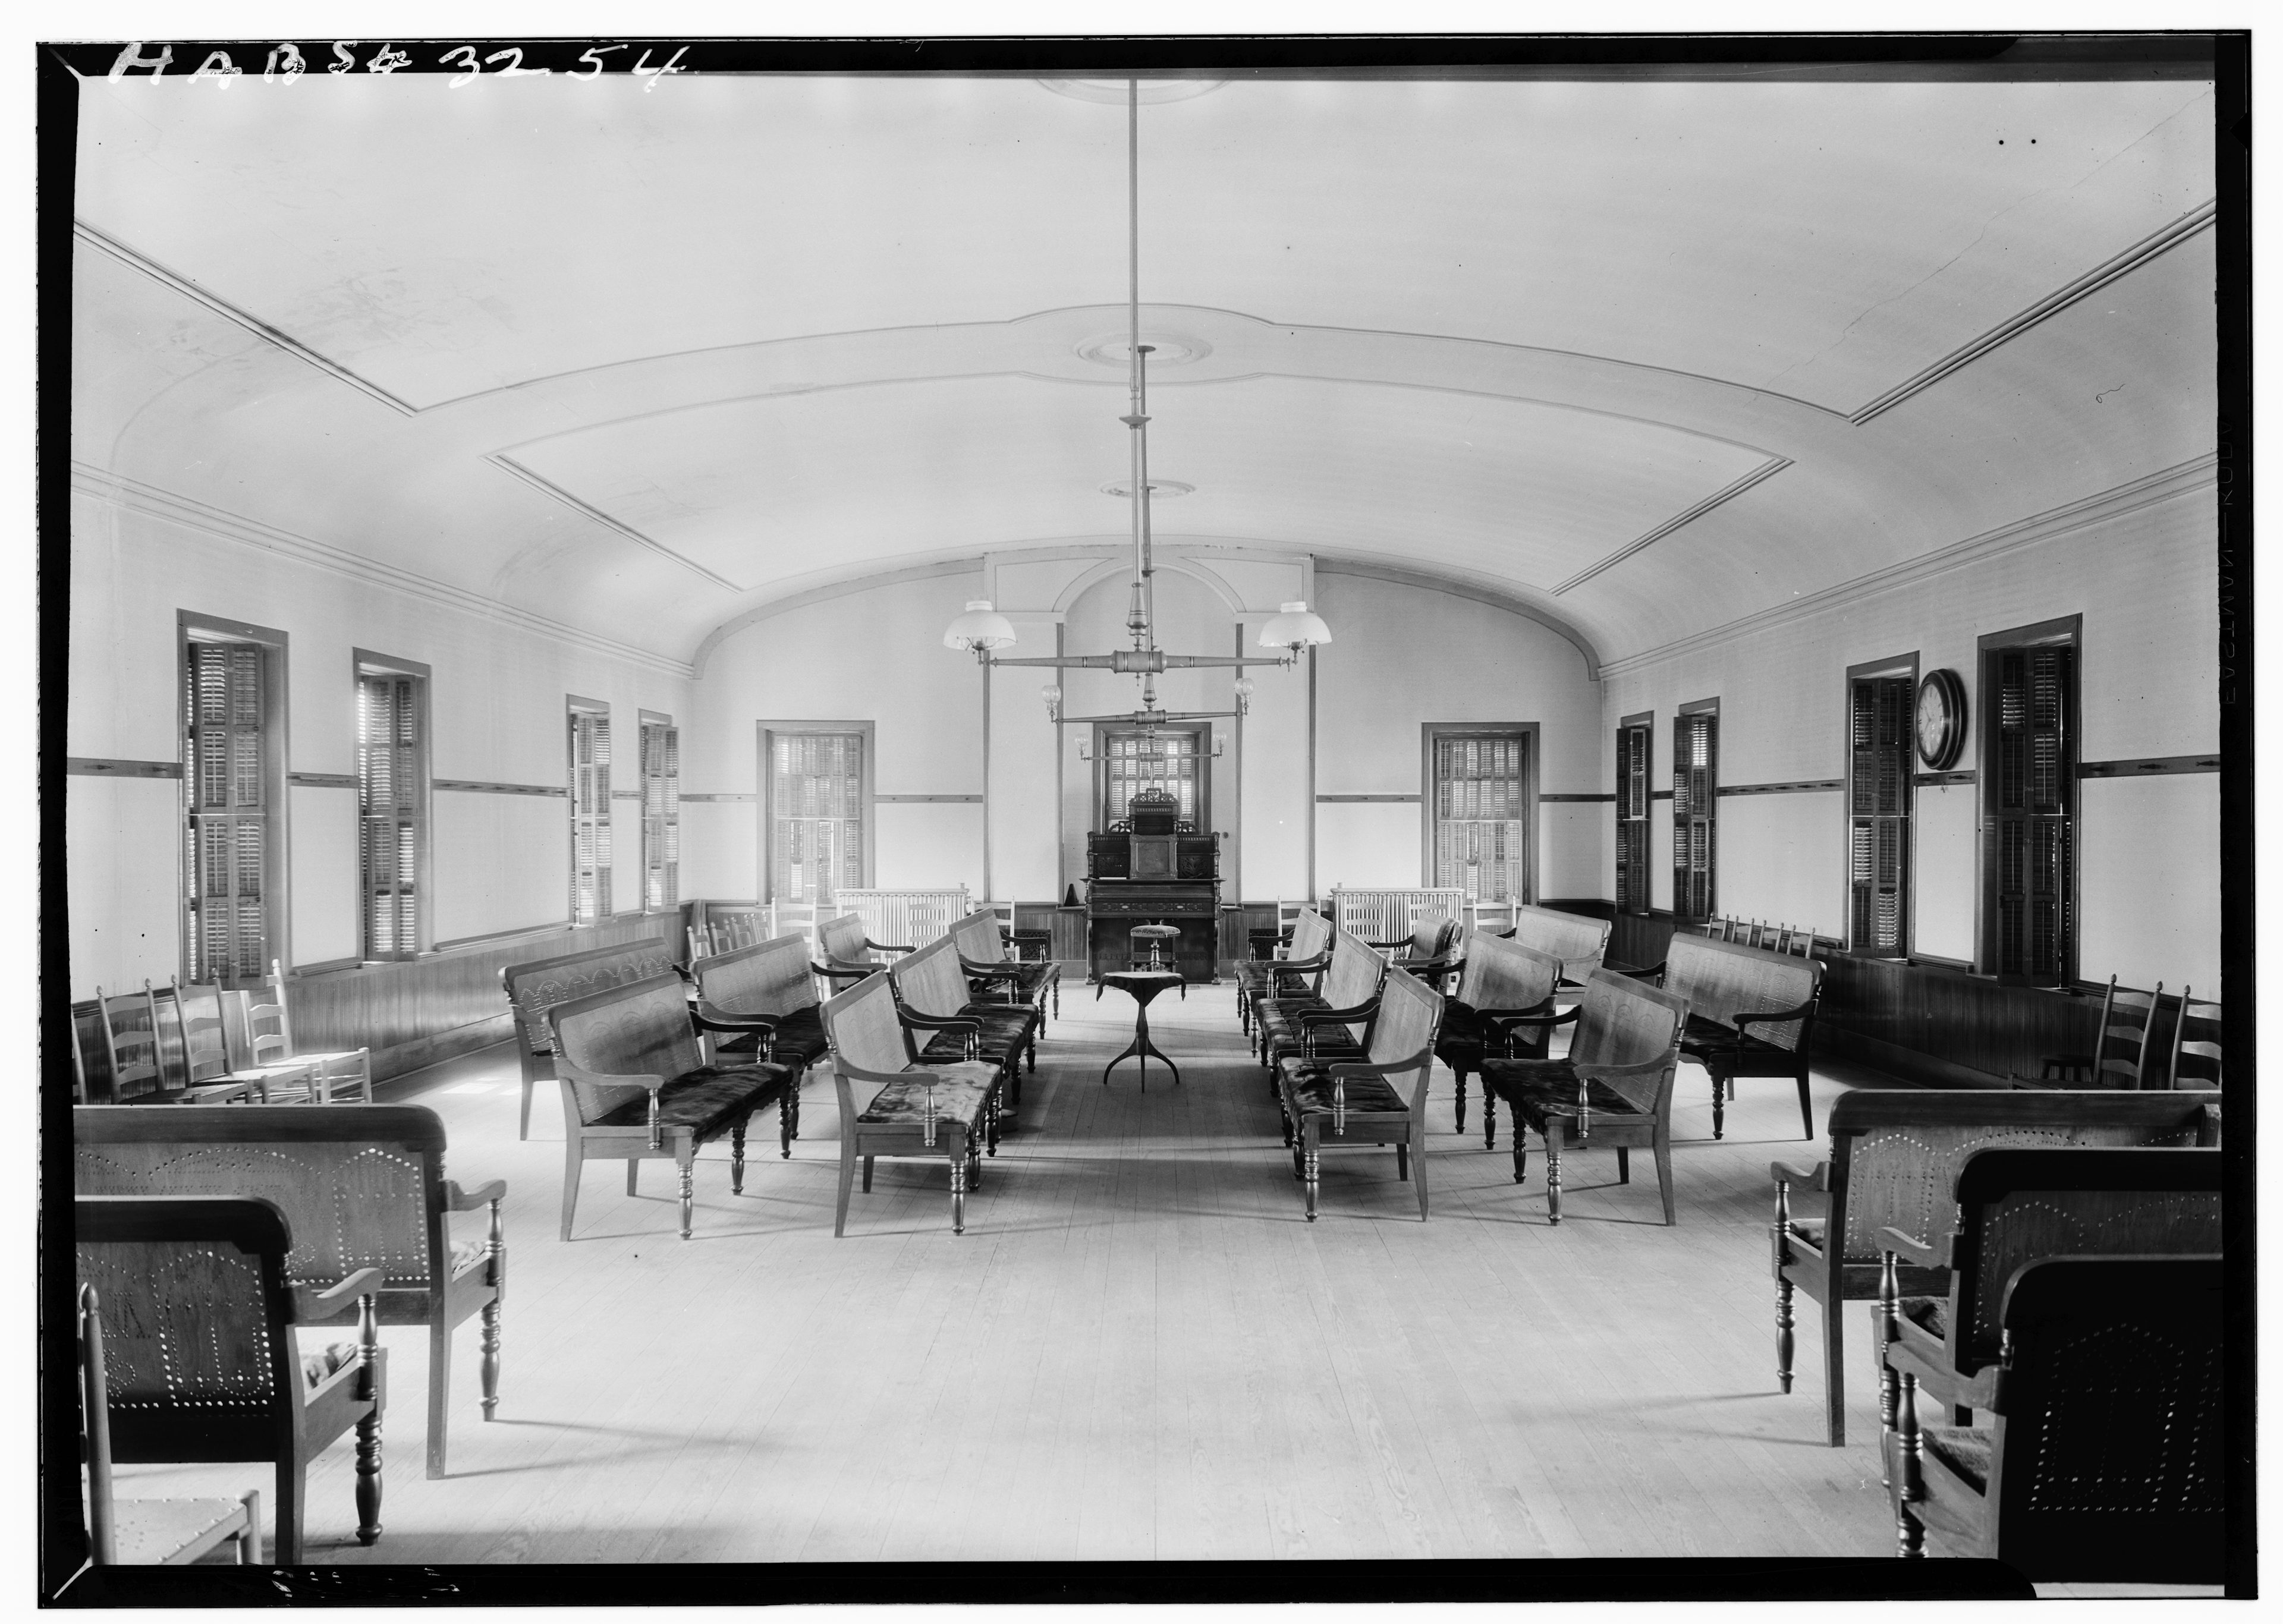 Second floor of the Shaker Meeting House at Mount Lebanon, NY, after 1933, Historic American Building Survey